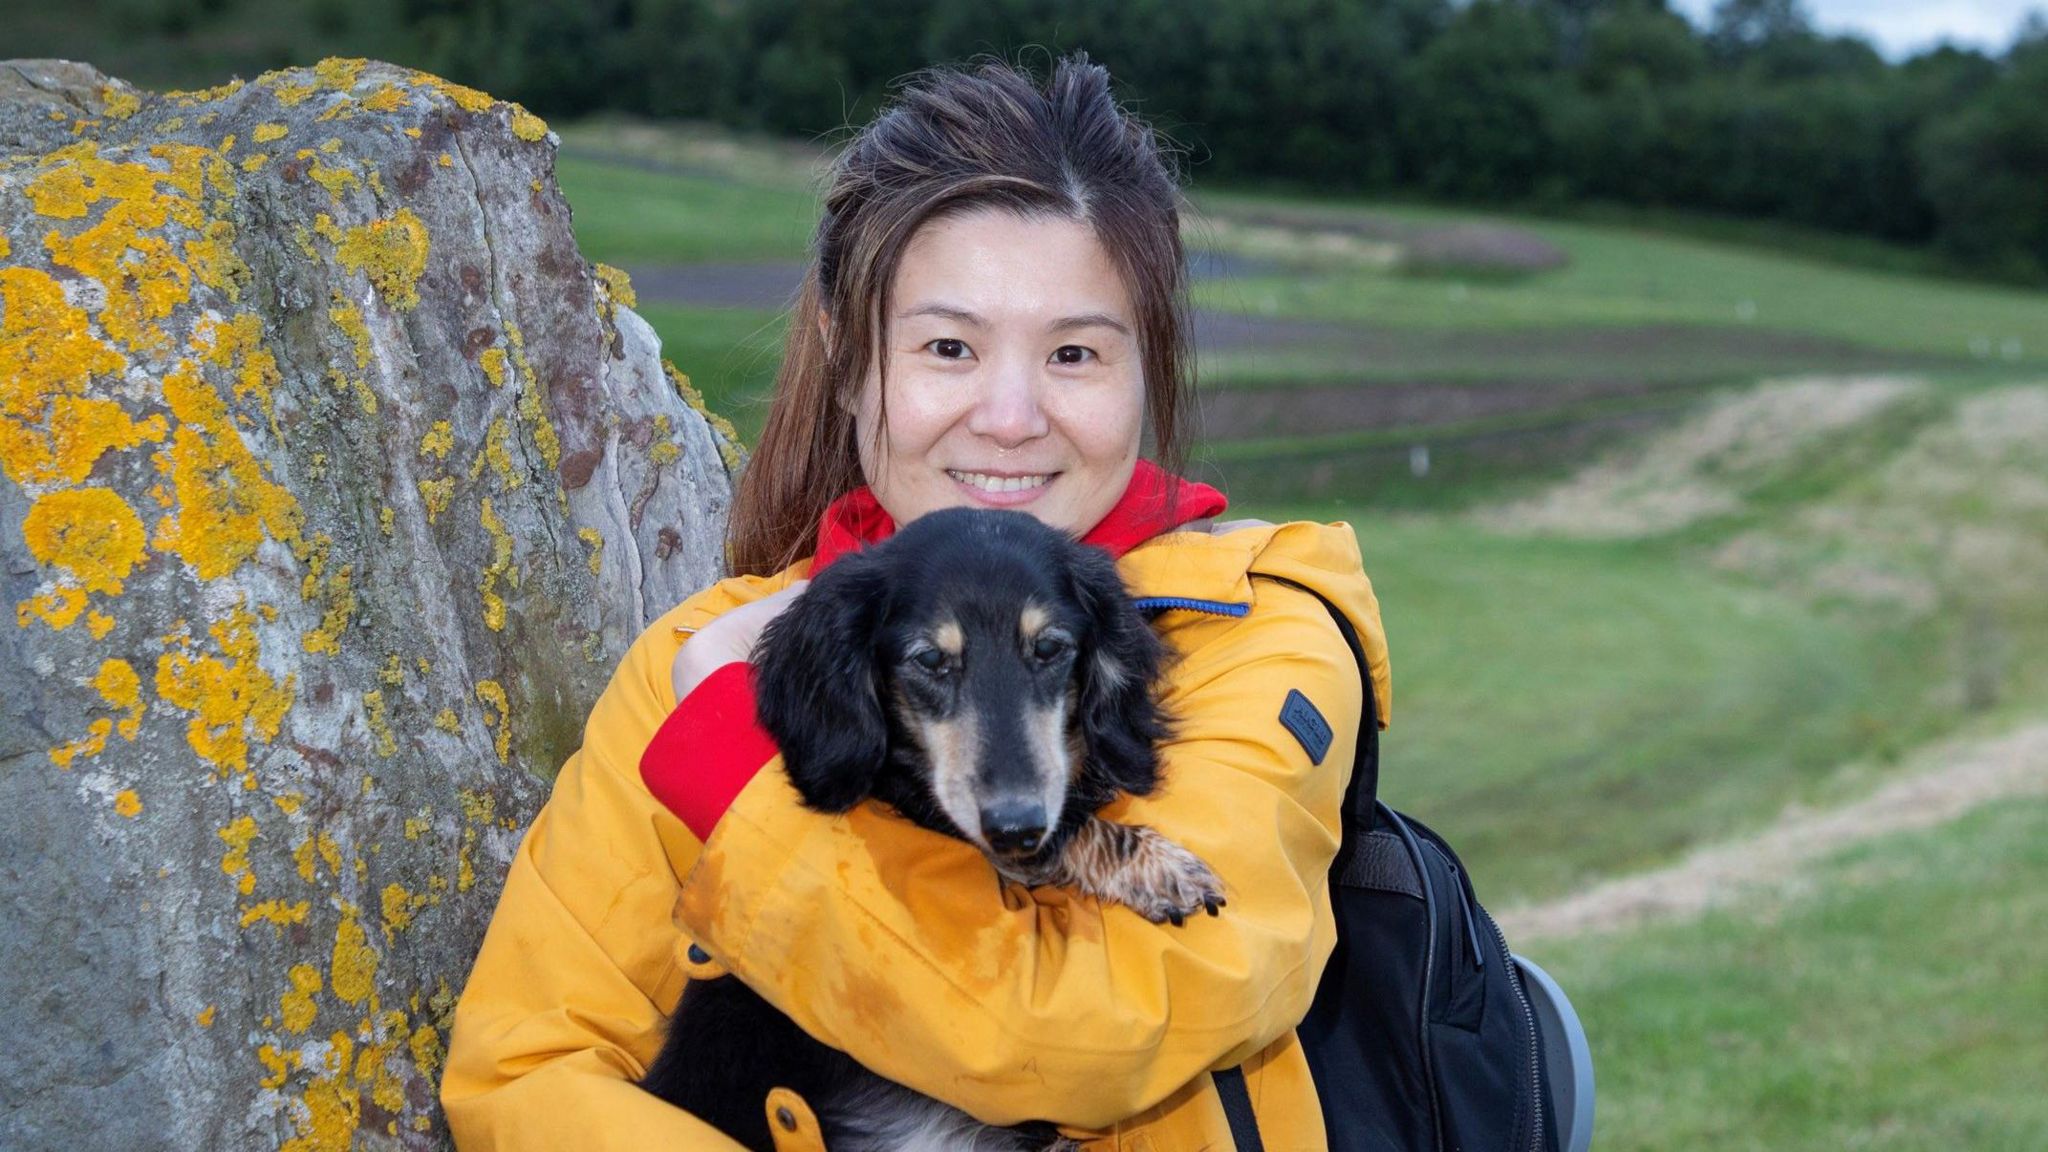 Sue Siu and her dog at the Crawick Multiverse